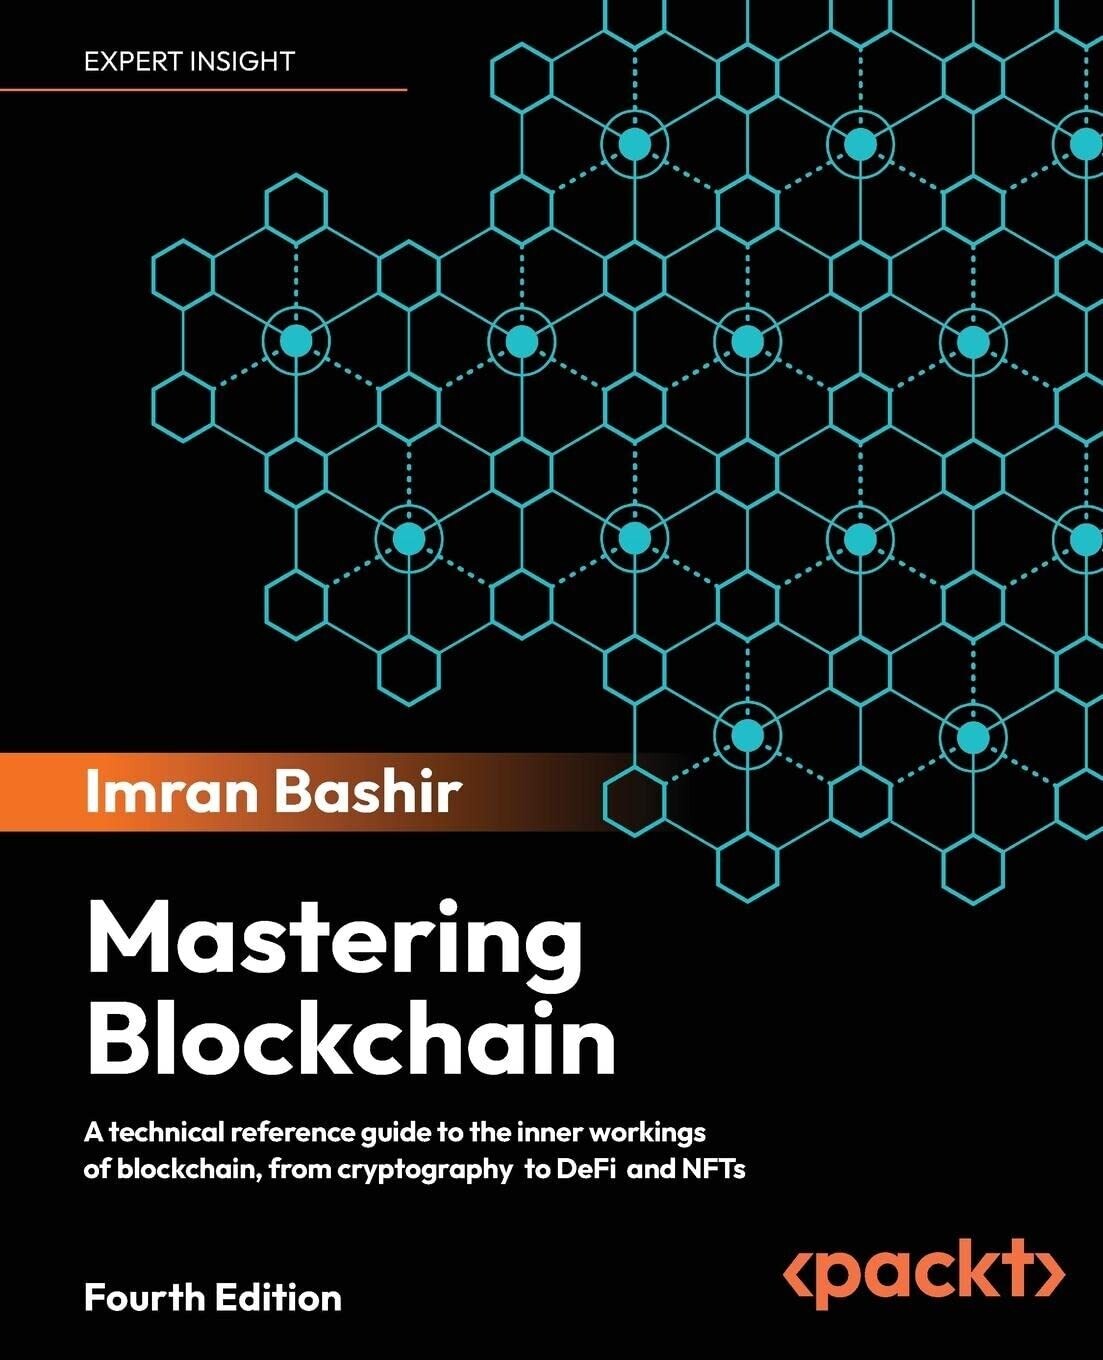 Mastering Blockchain: A technical reference guide to the inner workings of blockchain